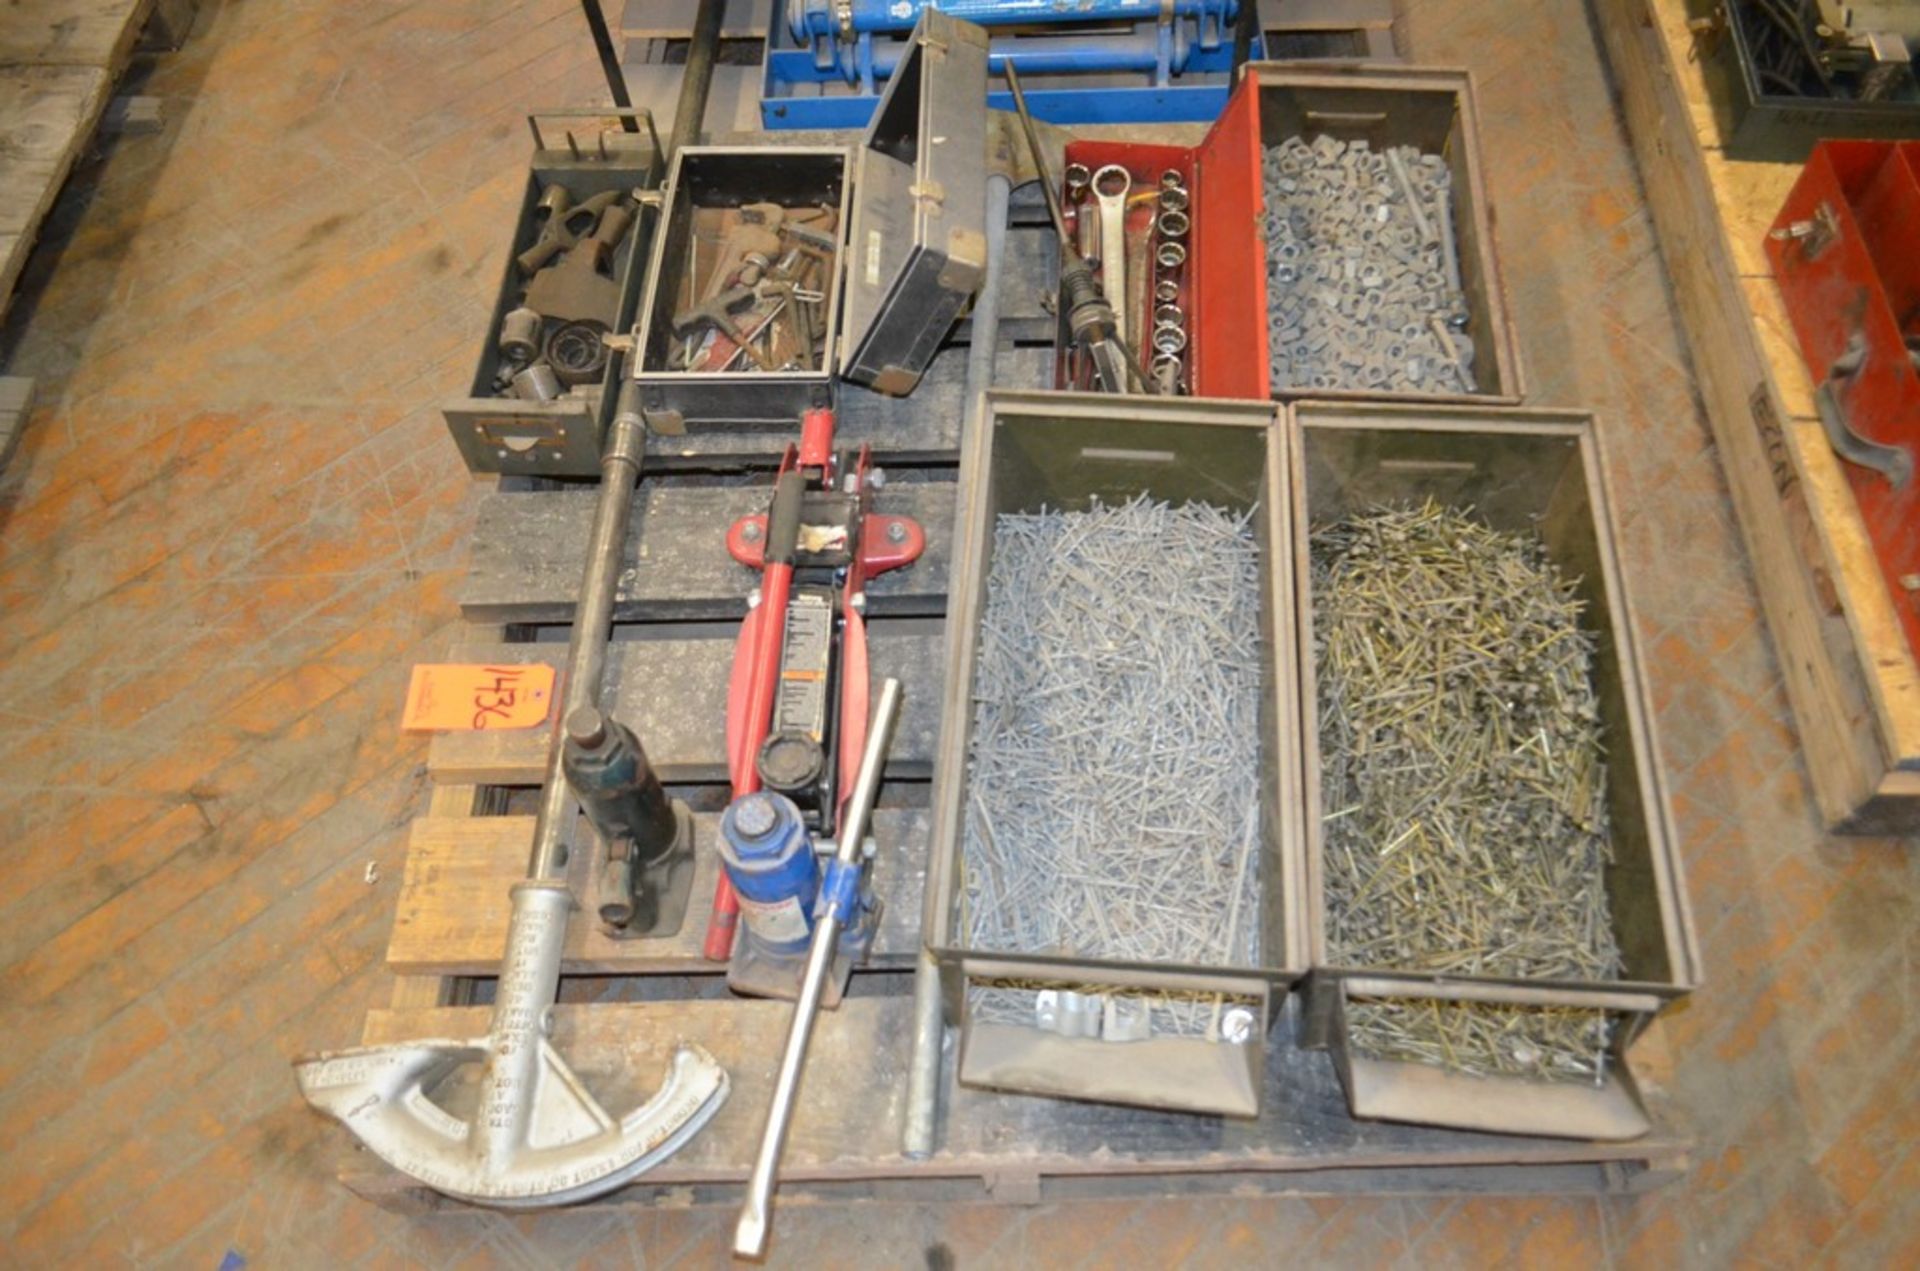 Lot - Hydraulic Jacks, Pipe Bender, Hand Wrenches, Nails Etc. - Image 2 of 2